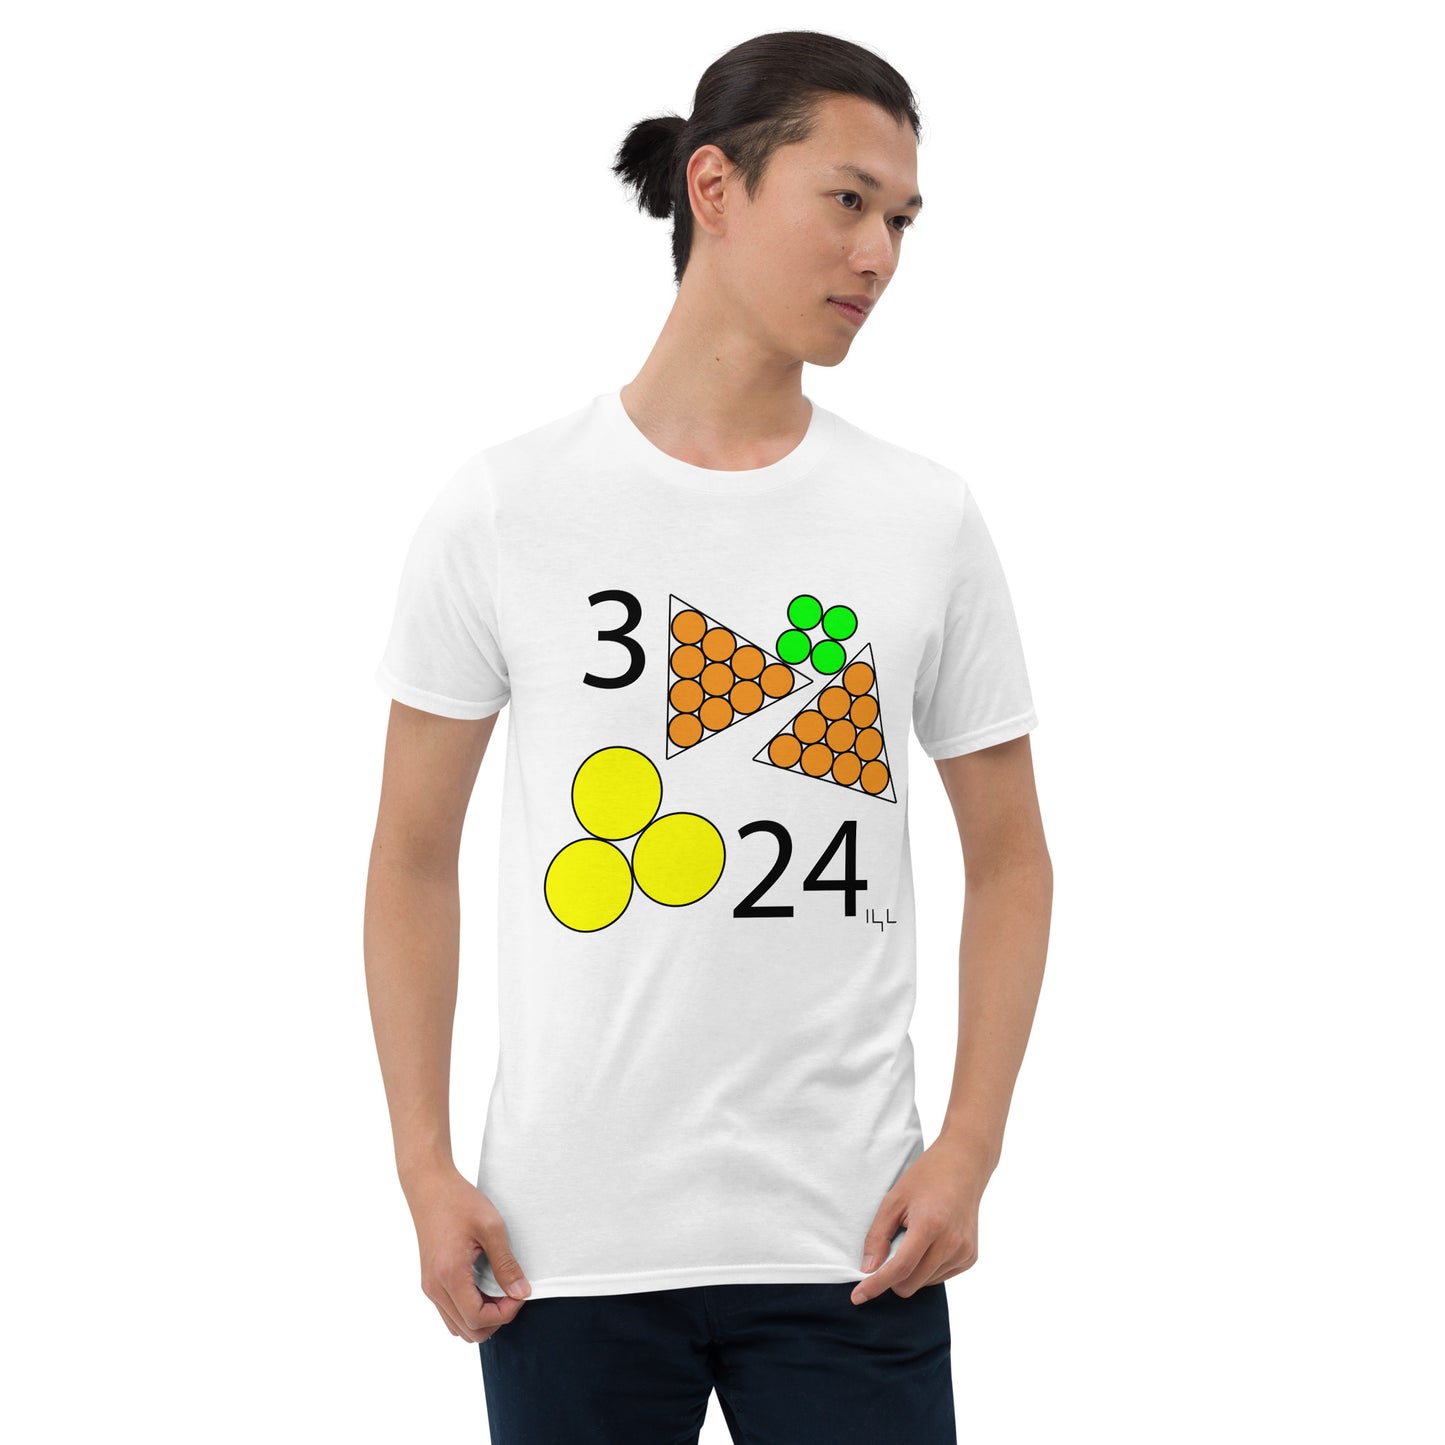 March 24th Yellow T-Shirt at 3:24 0324 324